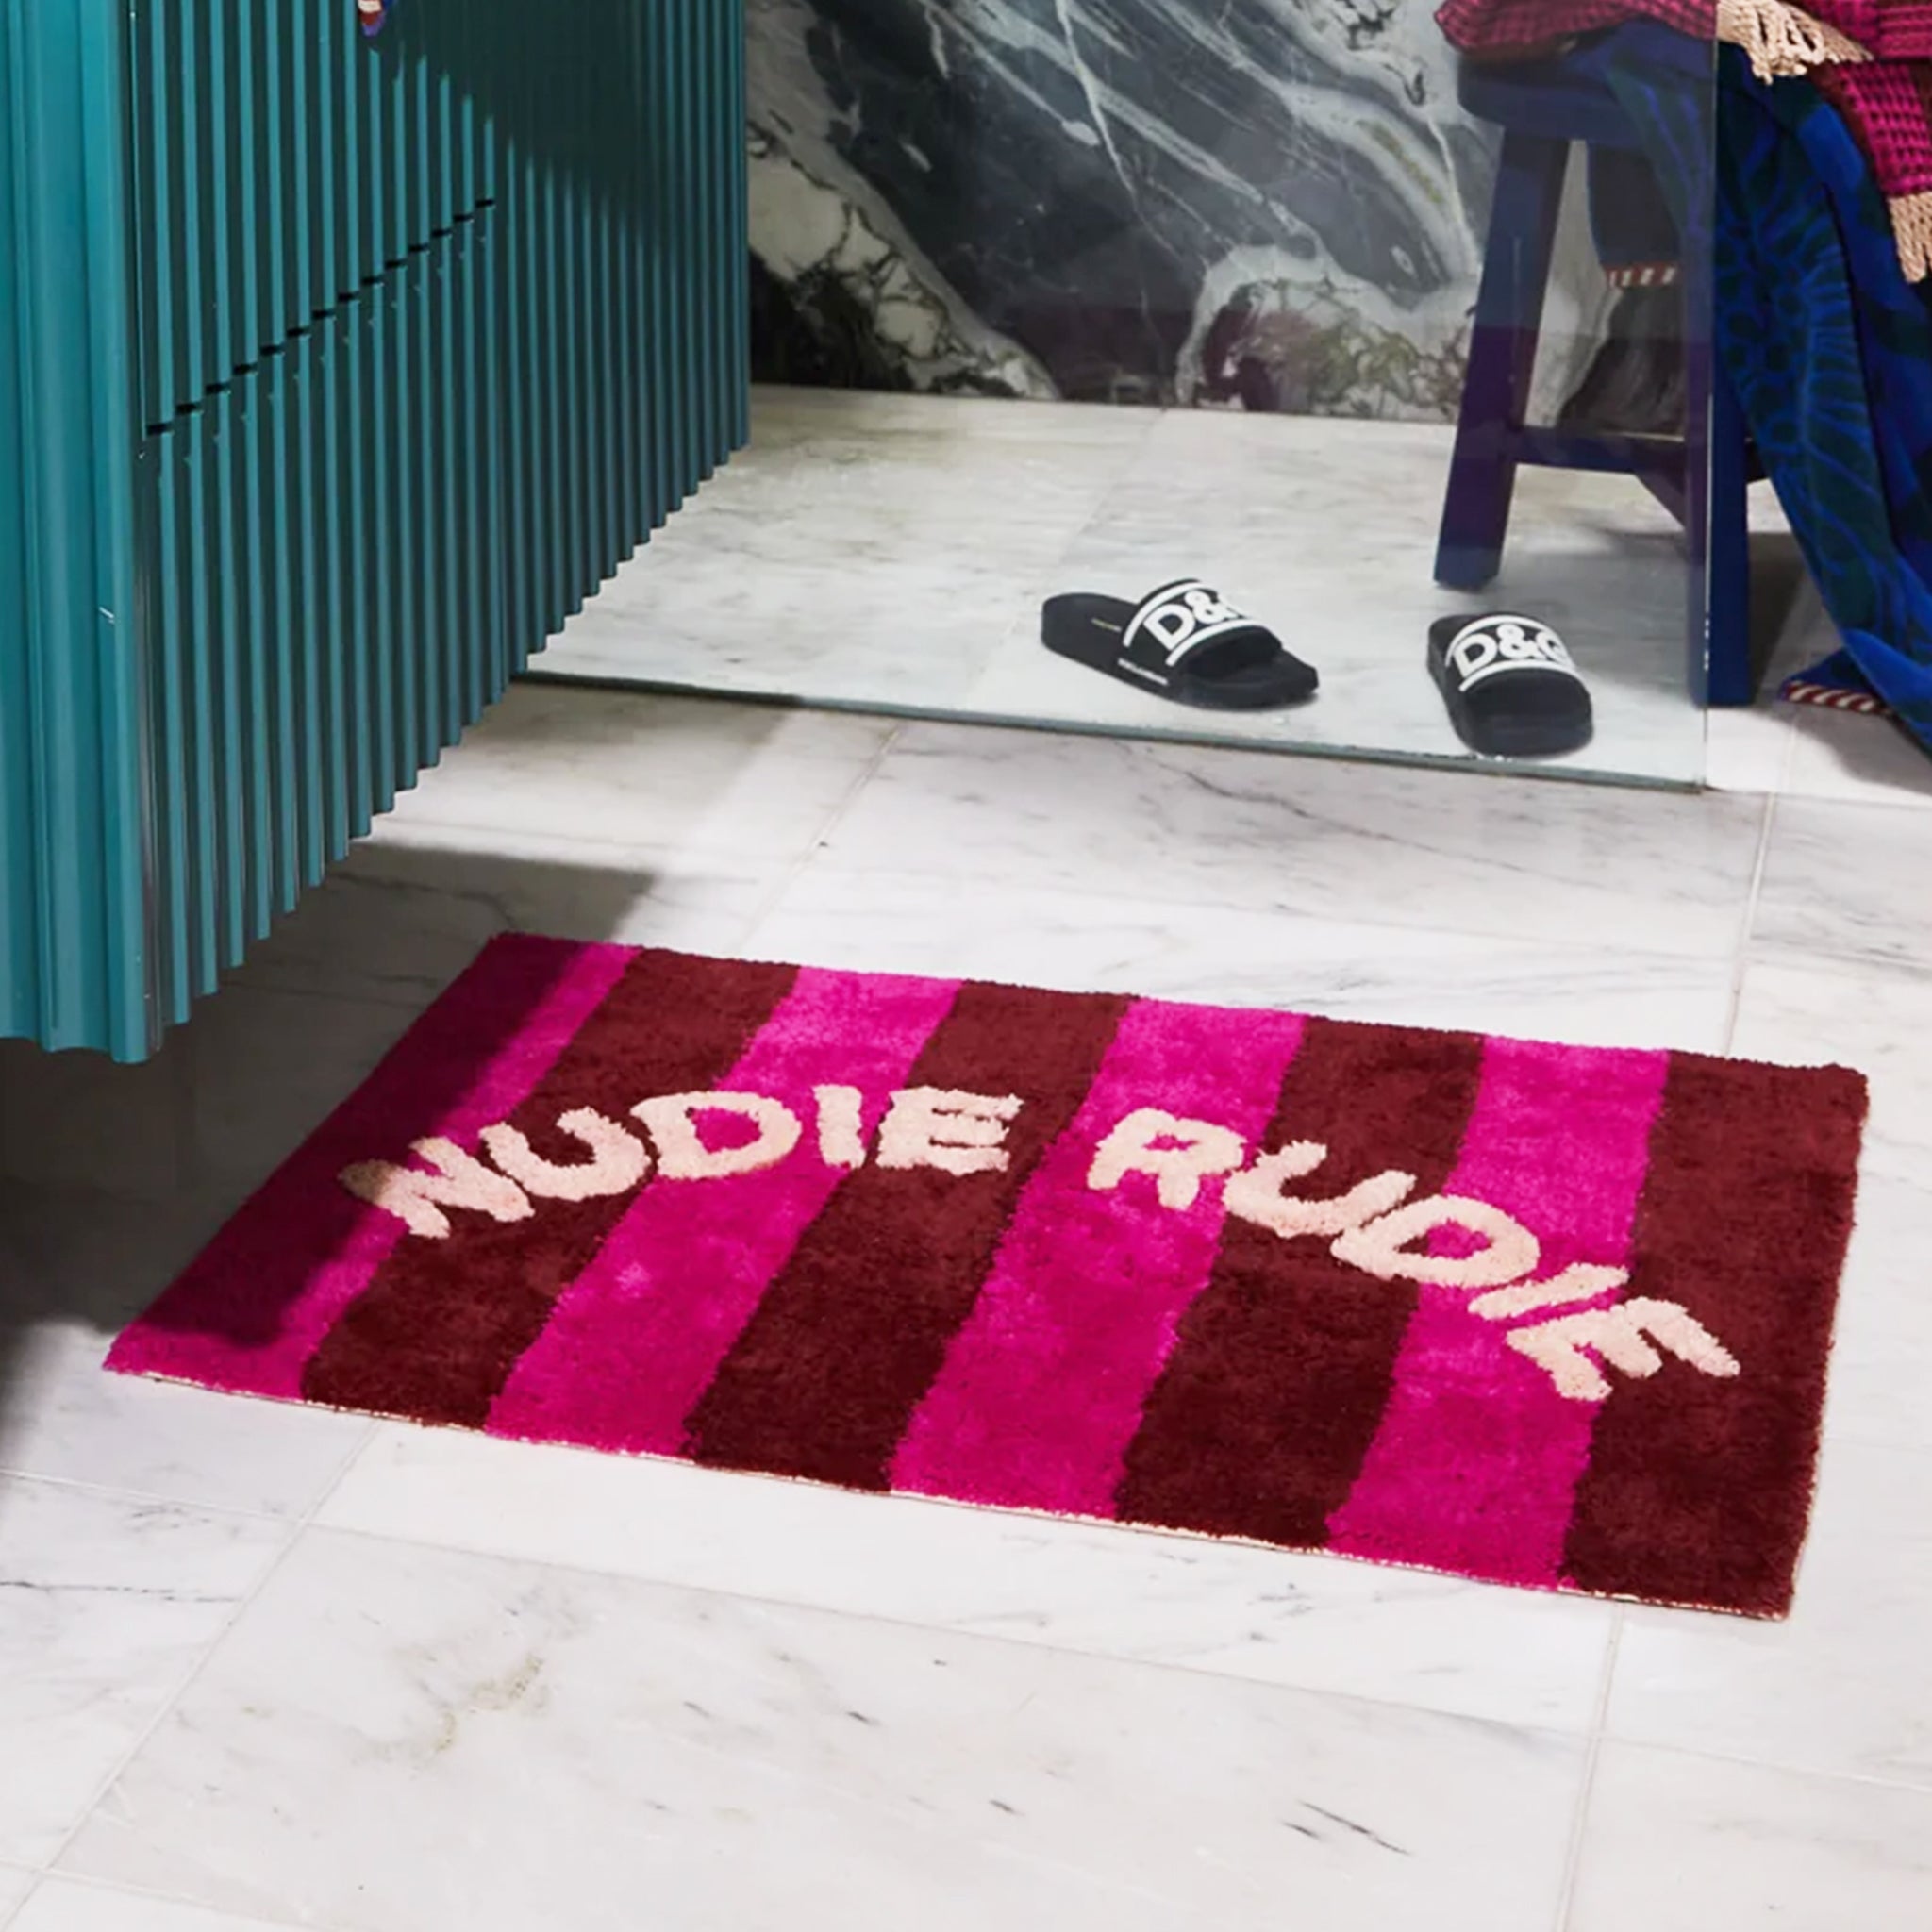 A hot pink and burgundy striped bath mat with white text arched in the center that reads, "Nudie Rudie".